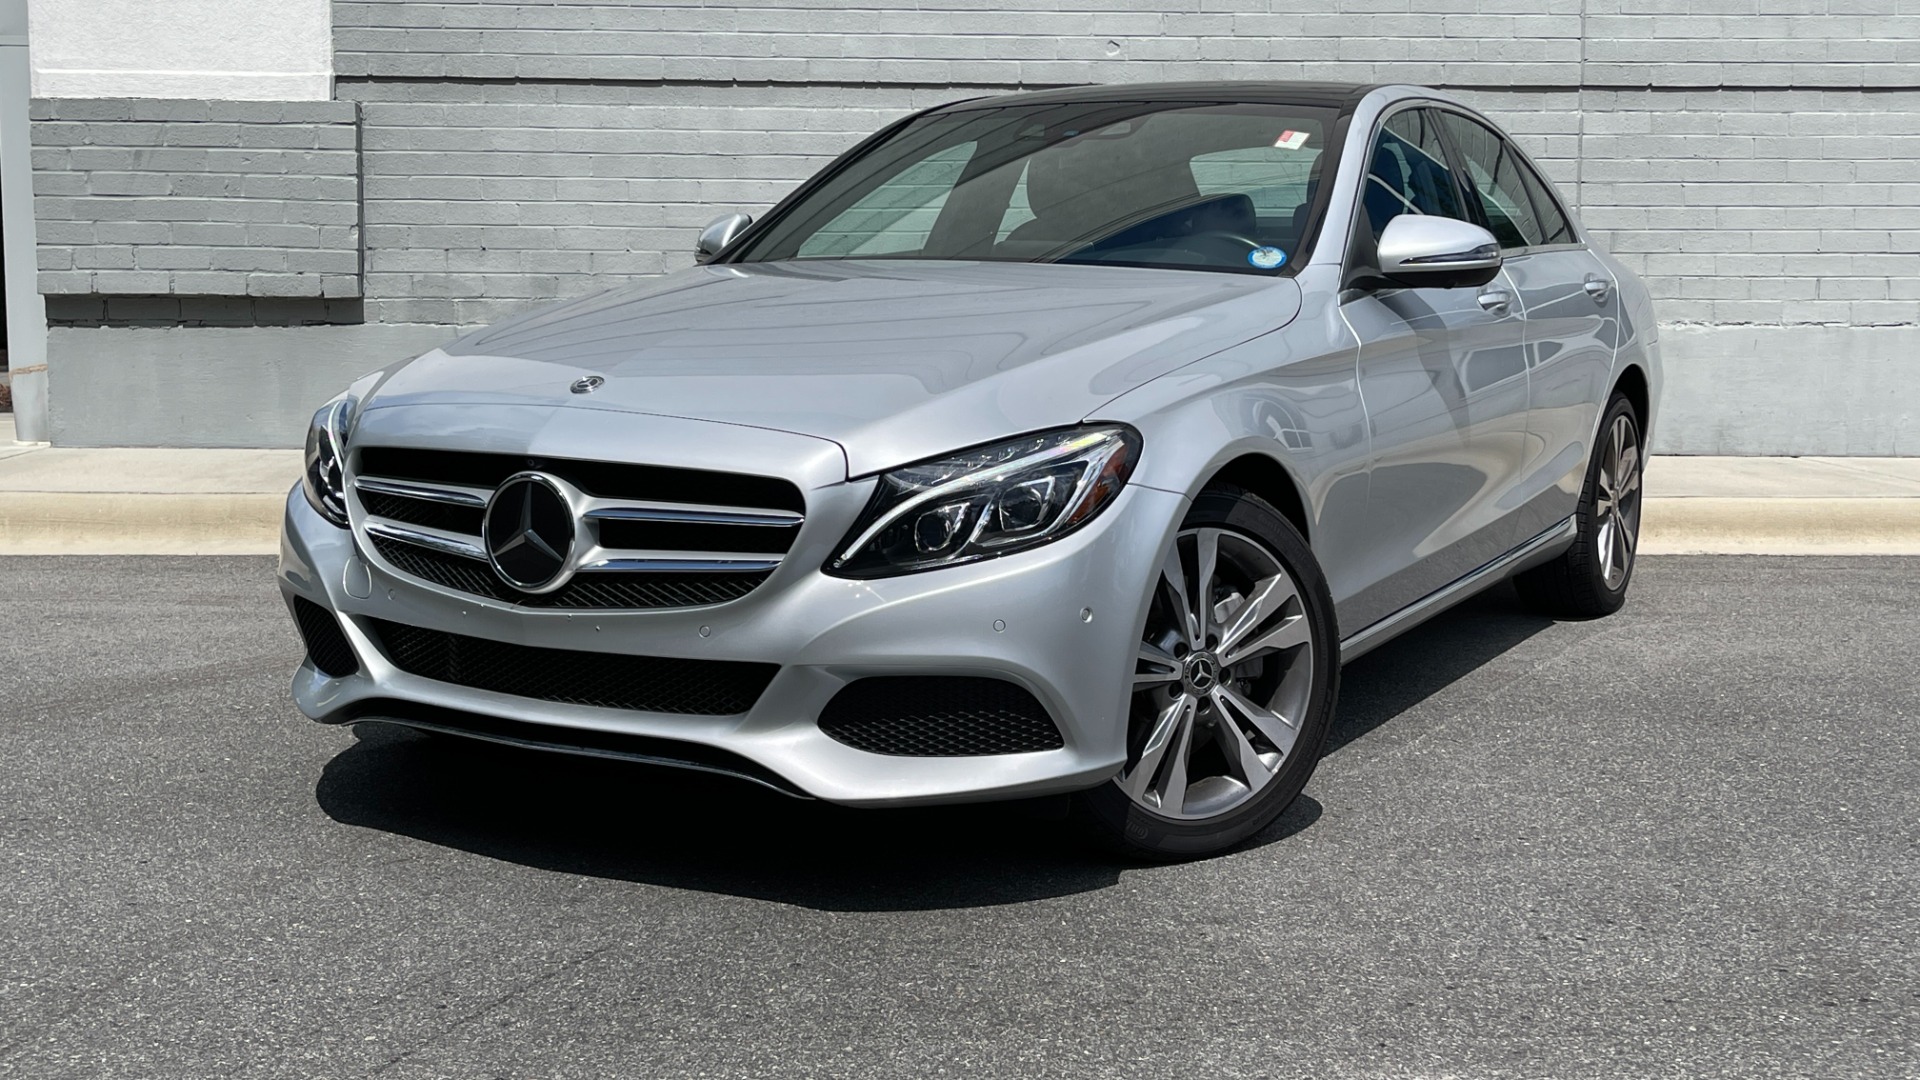 Used 2018 Mercedes-Benz C-Class C300 / PANORAMIC / HEADS UP DISPLAY / ADVANCED LIGHTING / PREMIUM ASSISTANC for sale $32,995 at Formula Imports in Charlotte NC 28227 7